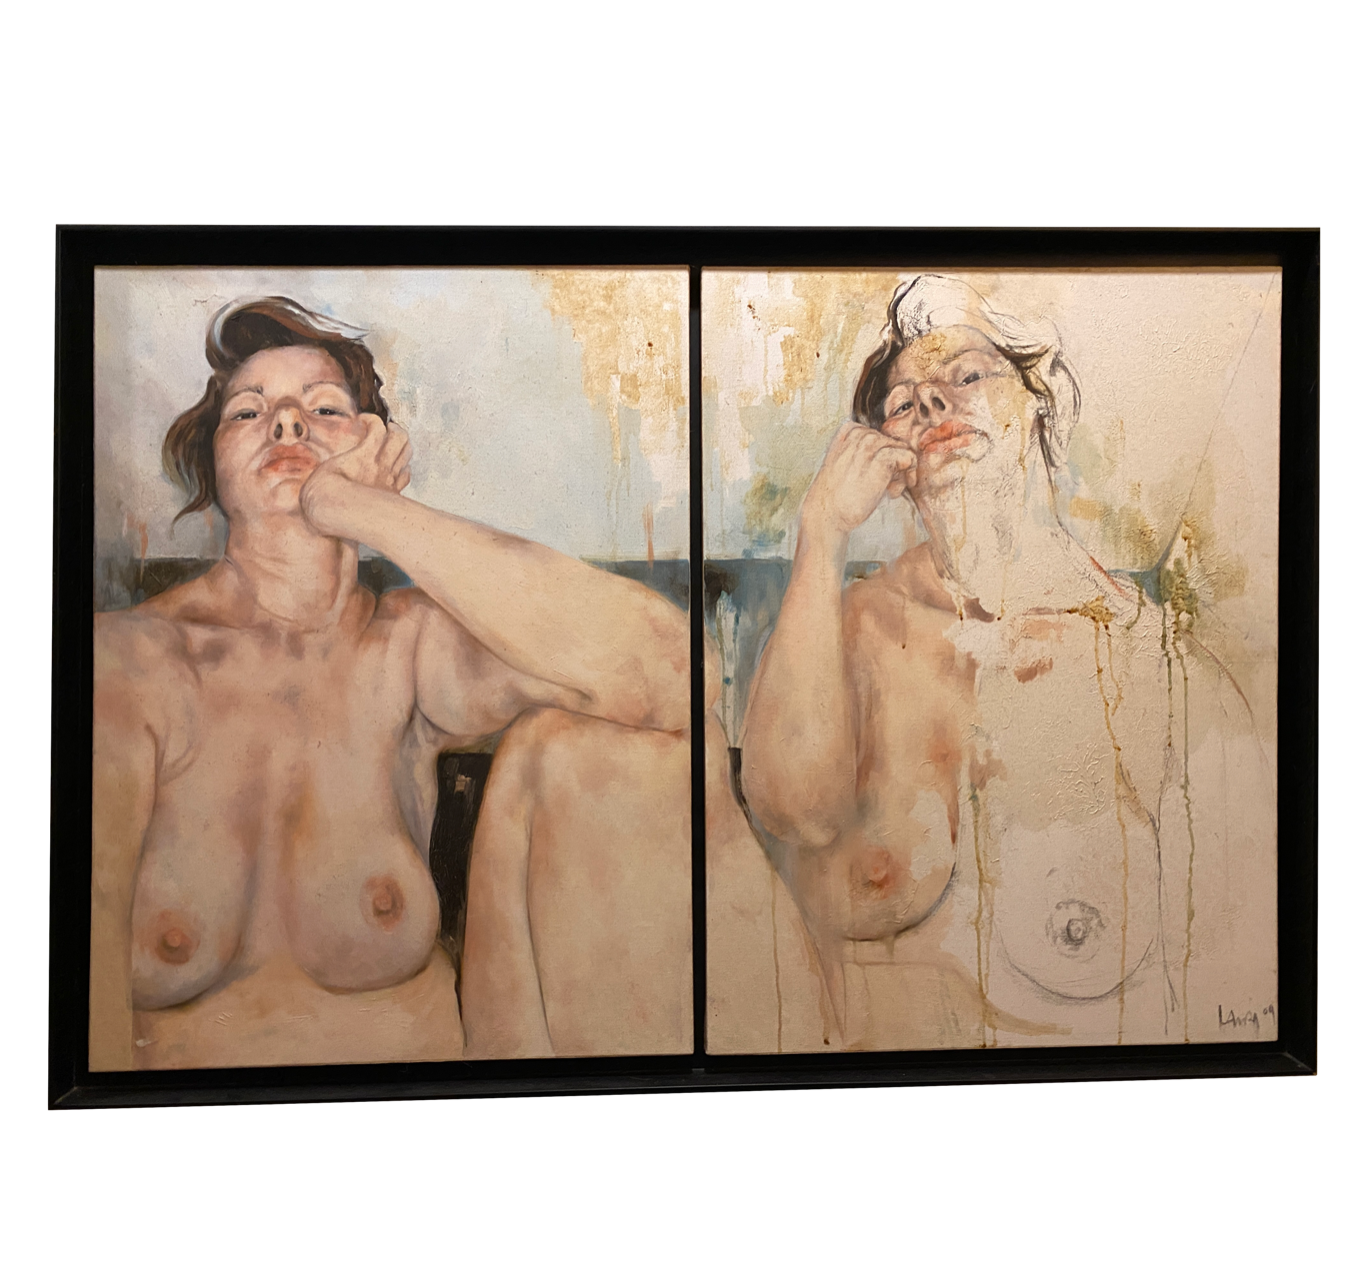 Magdalena LAMRI, very large diptych work from 2009